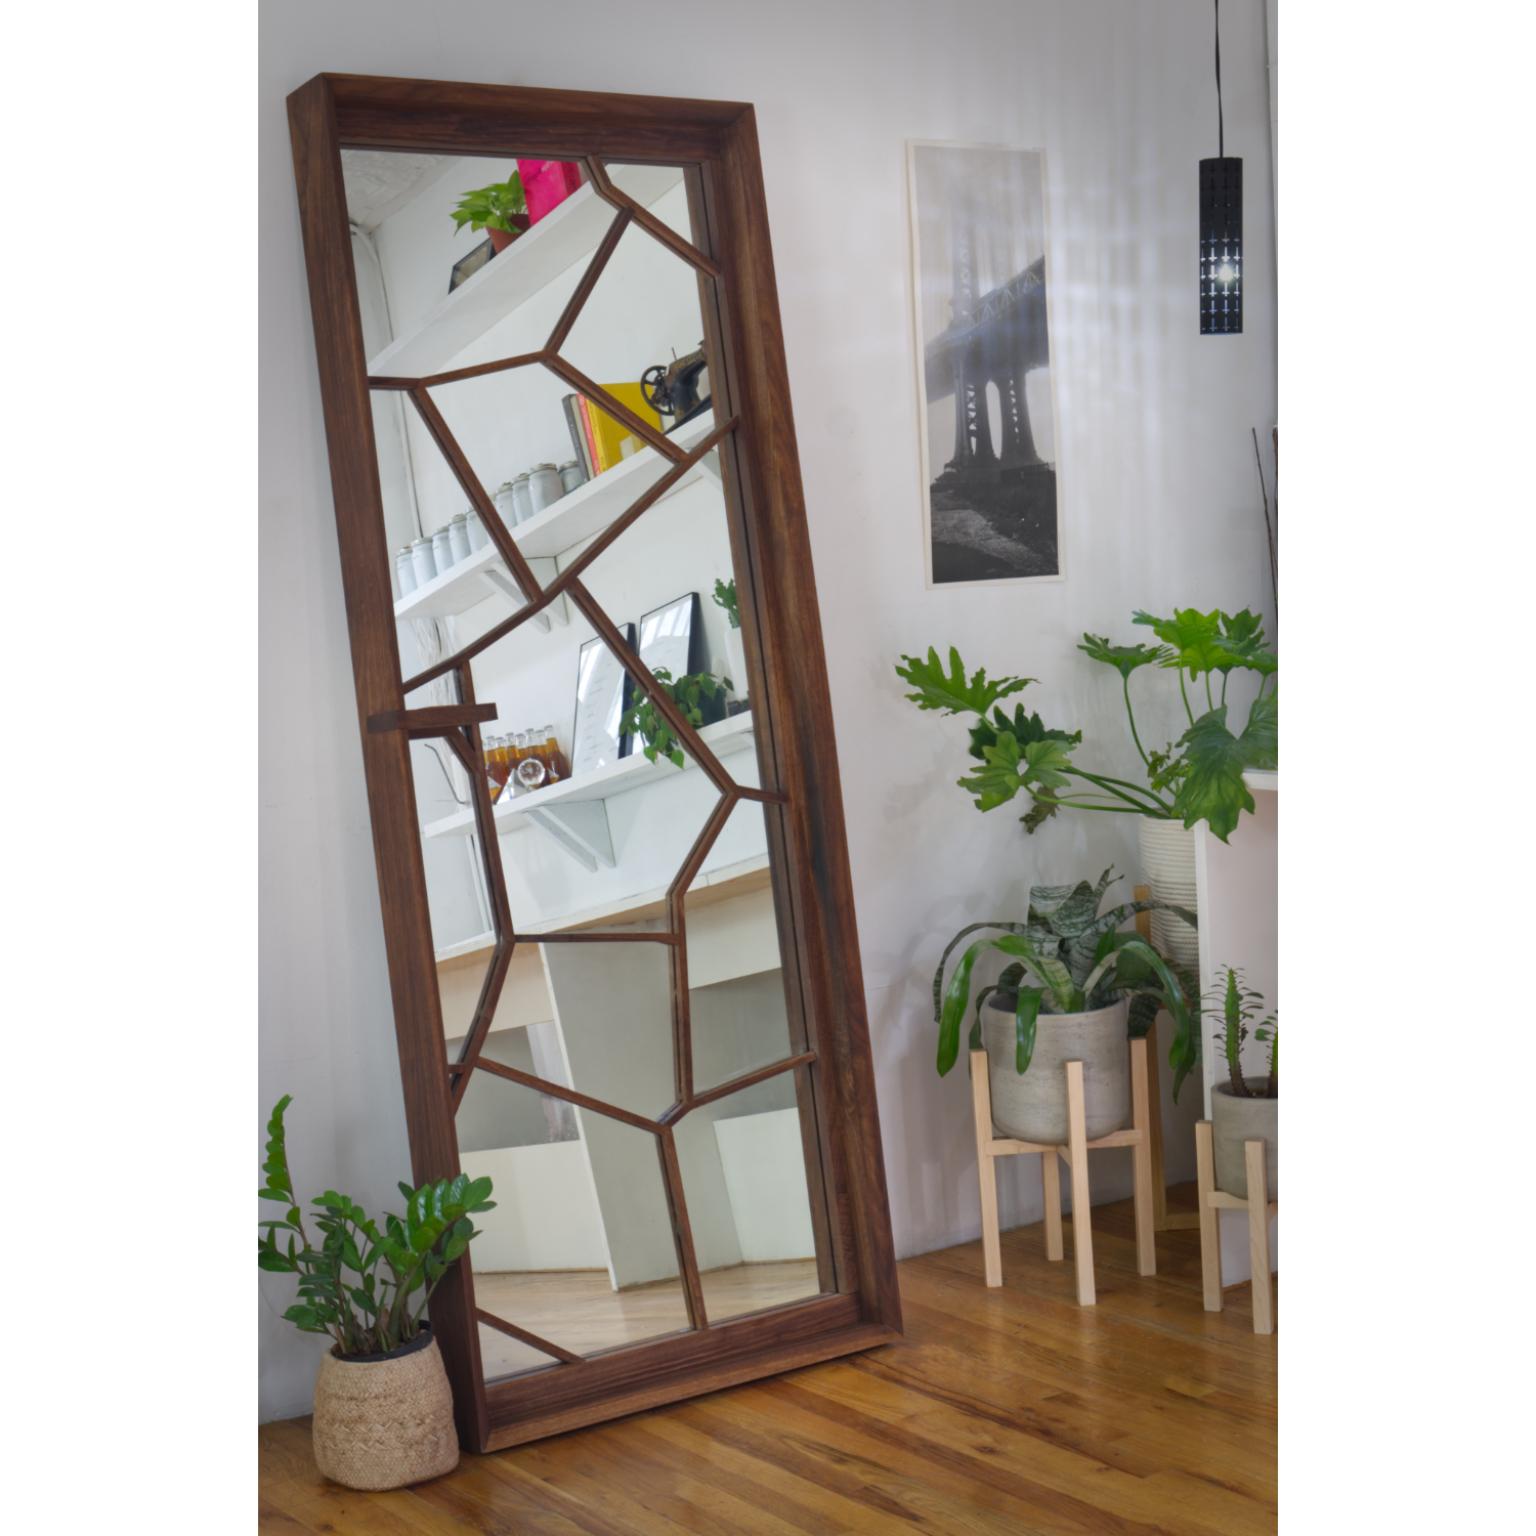 Constructed from solid American walnut the mirror is a portal to another universe. Standing at 6’+ tall it doubles space and stands at your favorite wall for the creation of the days outfit and beyond. We were interested in the fracture with this